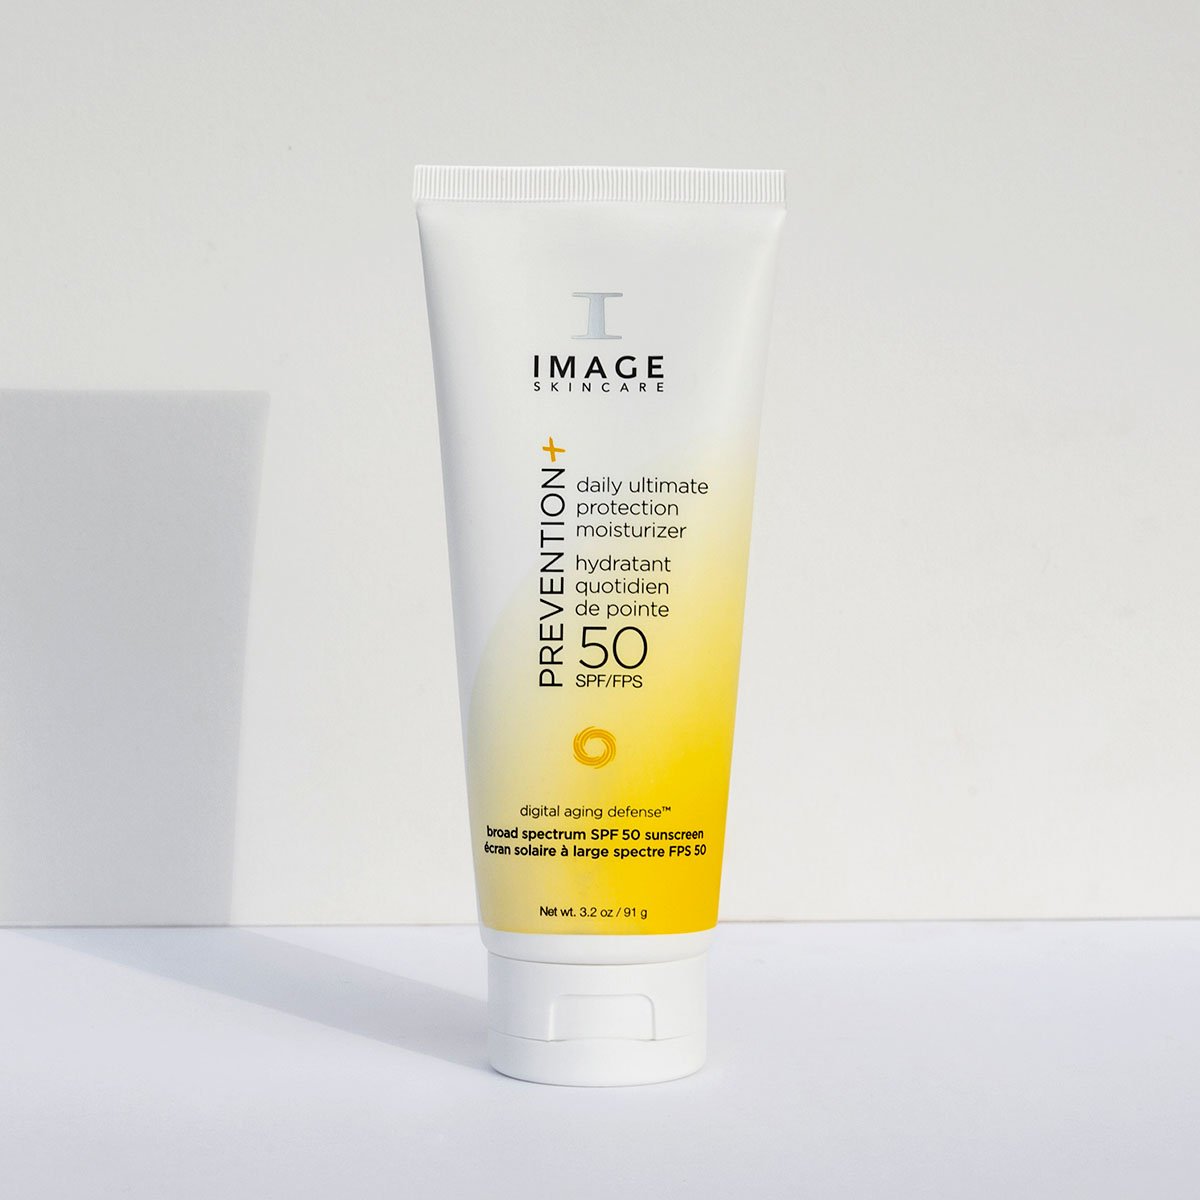 IMAGE - PREVENTION+ daily ultimate protection moisturizer SPF 50